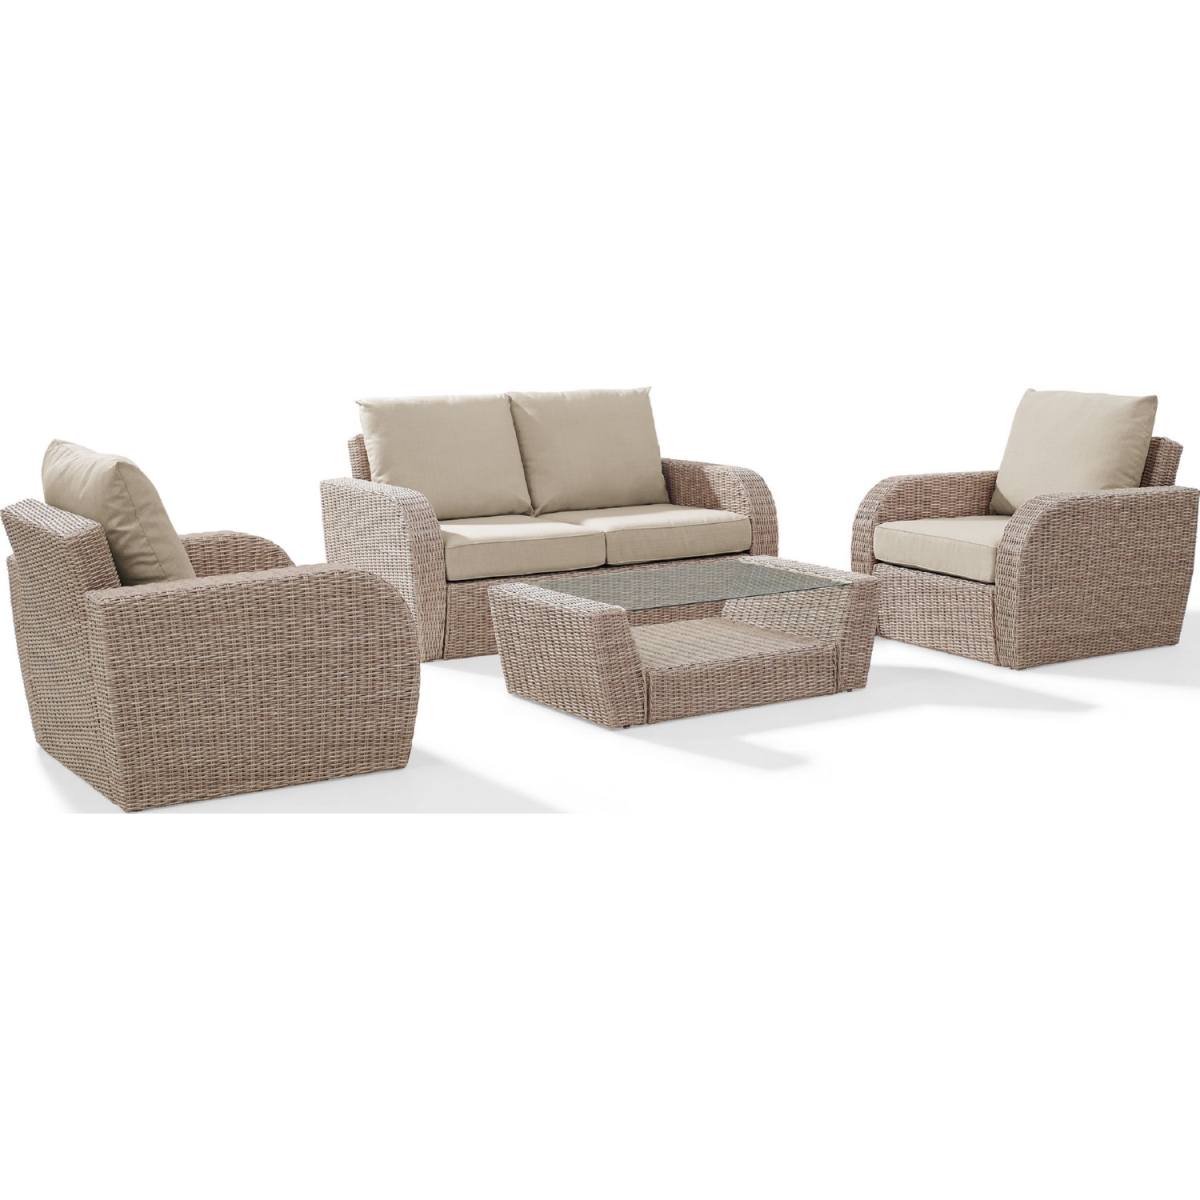 Ko70132wh-ol 4 Piece St. Augustine Outdoor Wicker Seating Set With Oatmeal Cushion - Loveseat, Two Chairs, Coffee Table